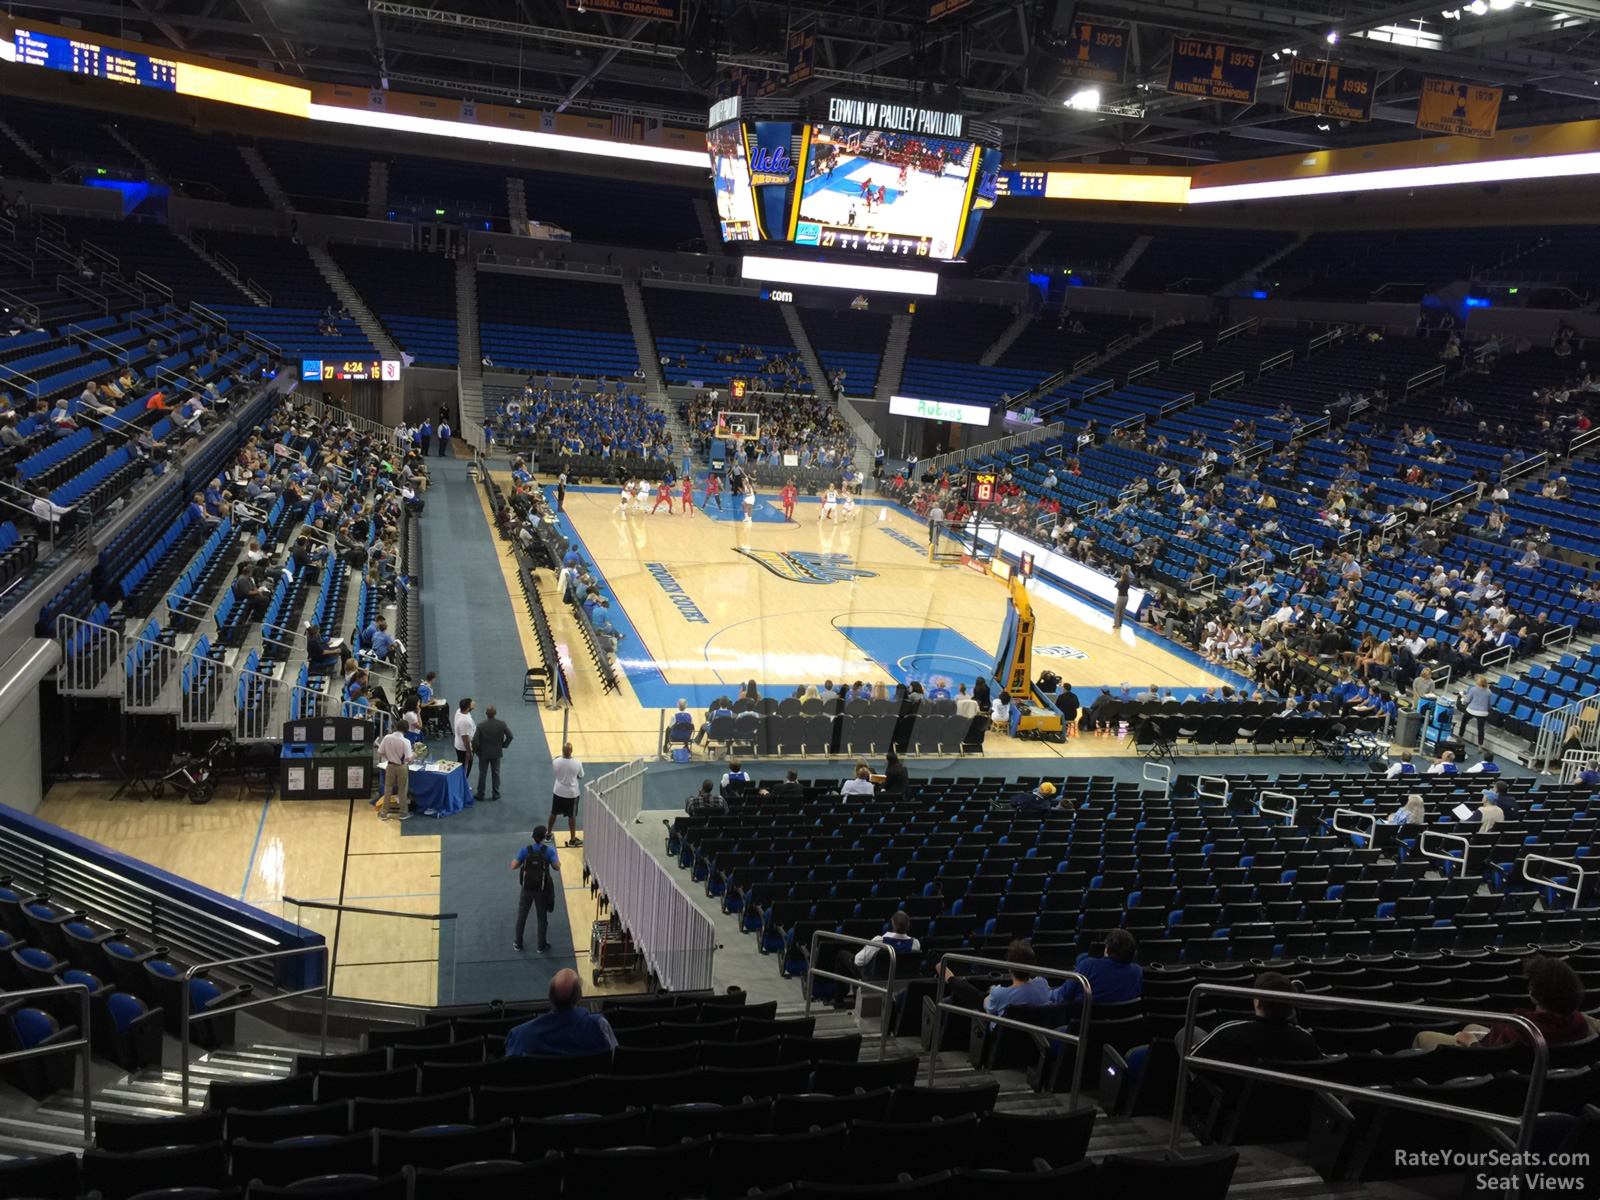 section 110, row 13 seat view  - pauley pavilion